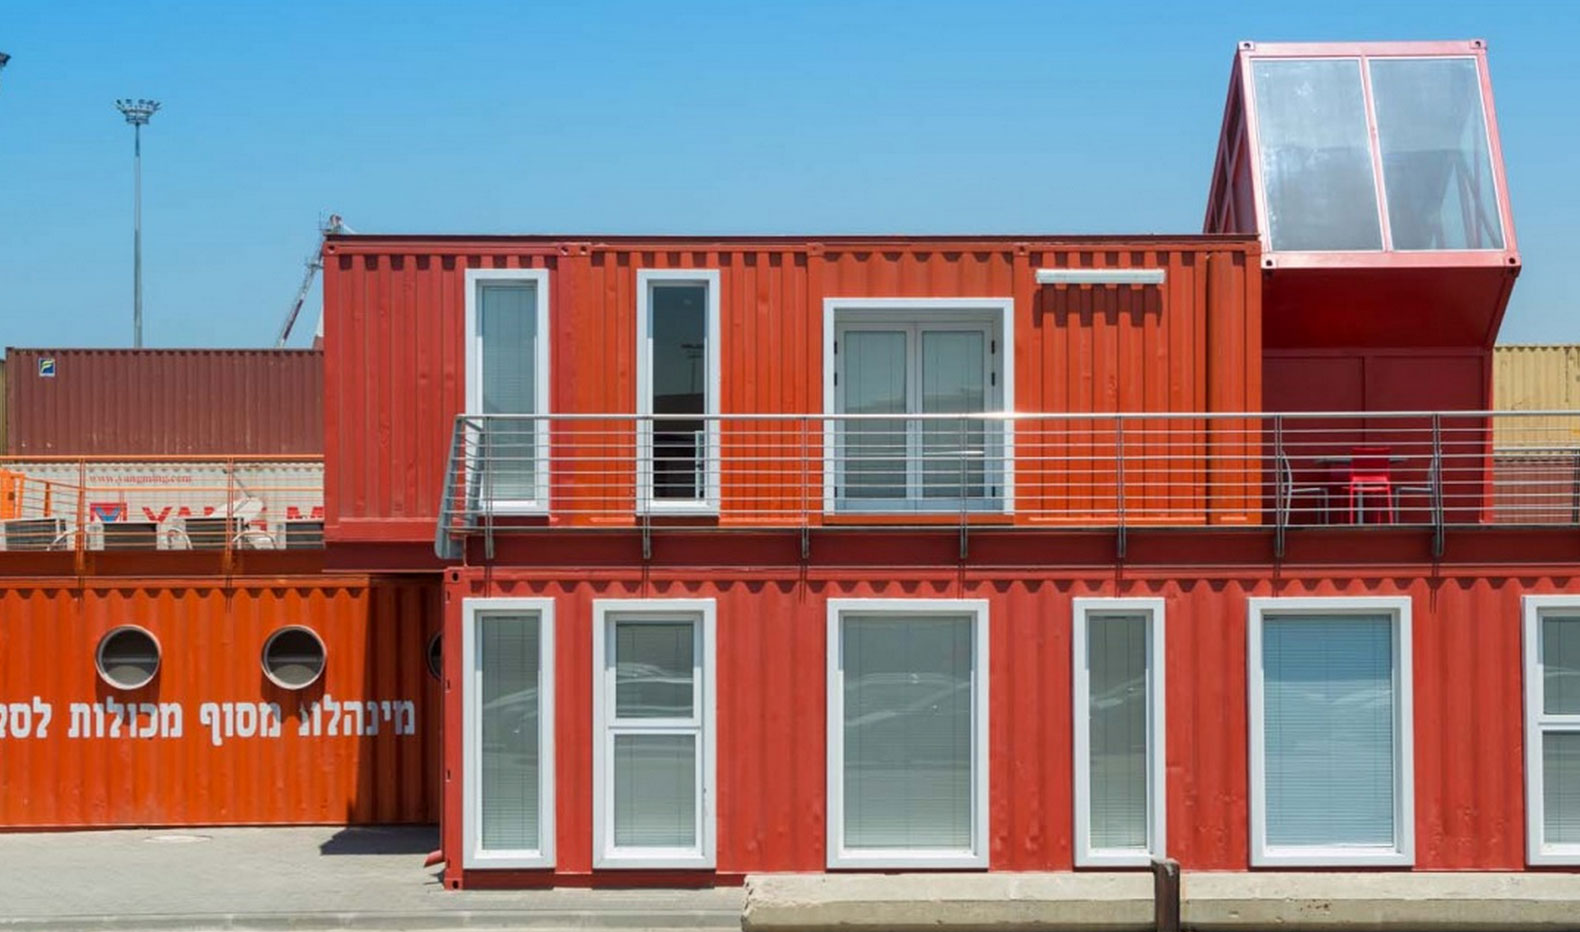 Shipping Container Offices Are Right At Home On An Industrial Seafront